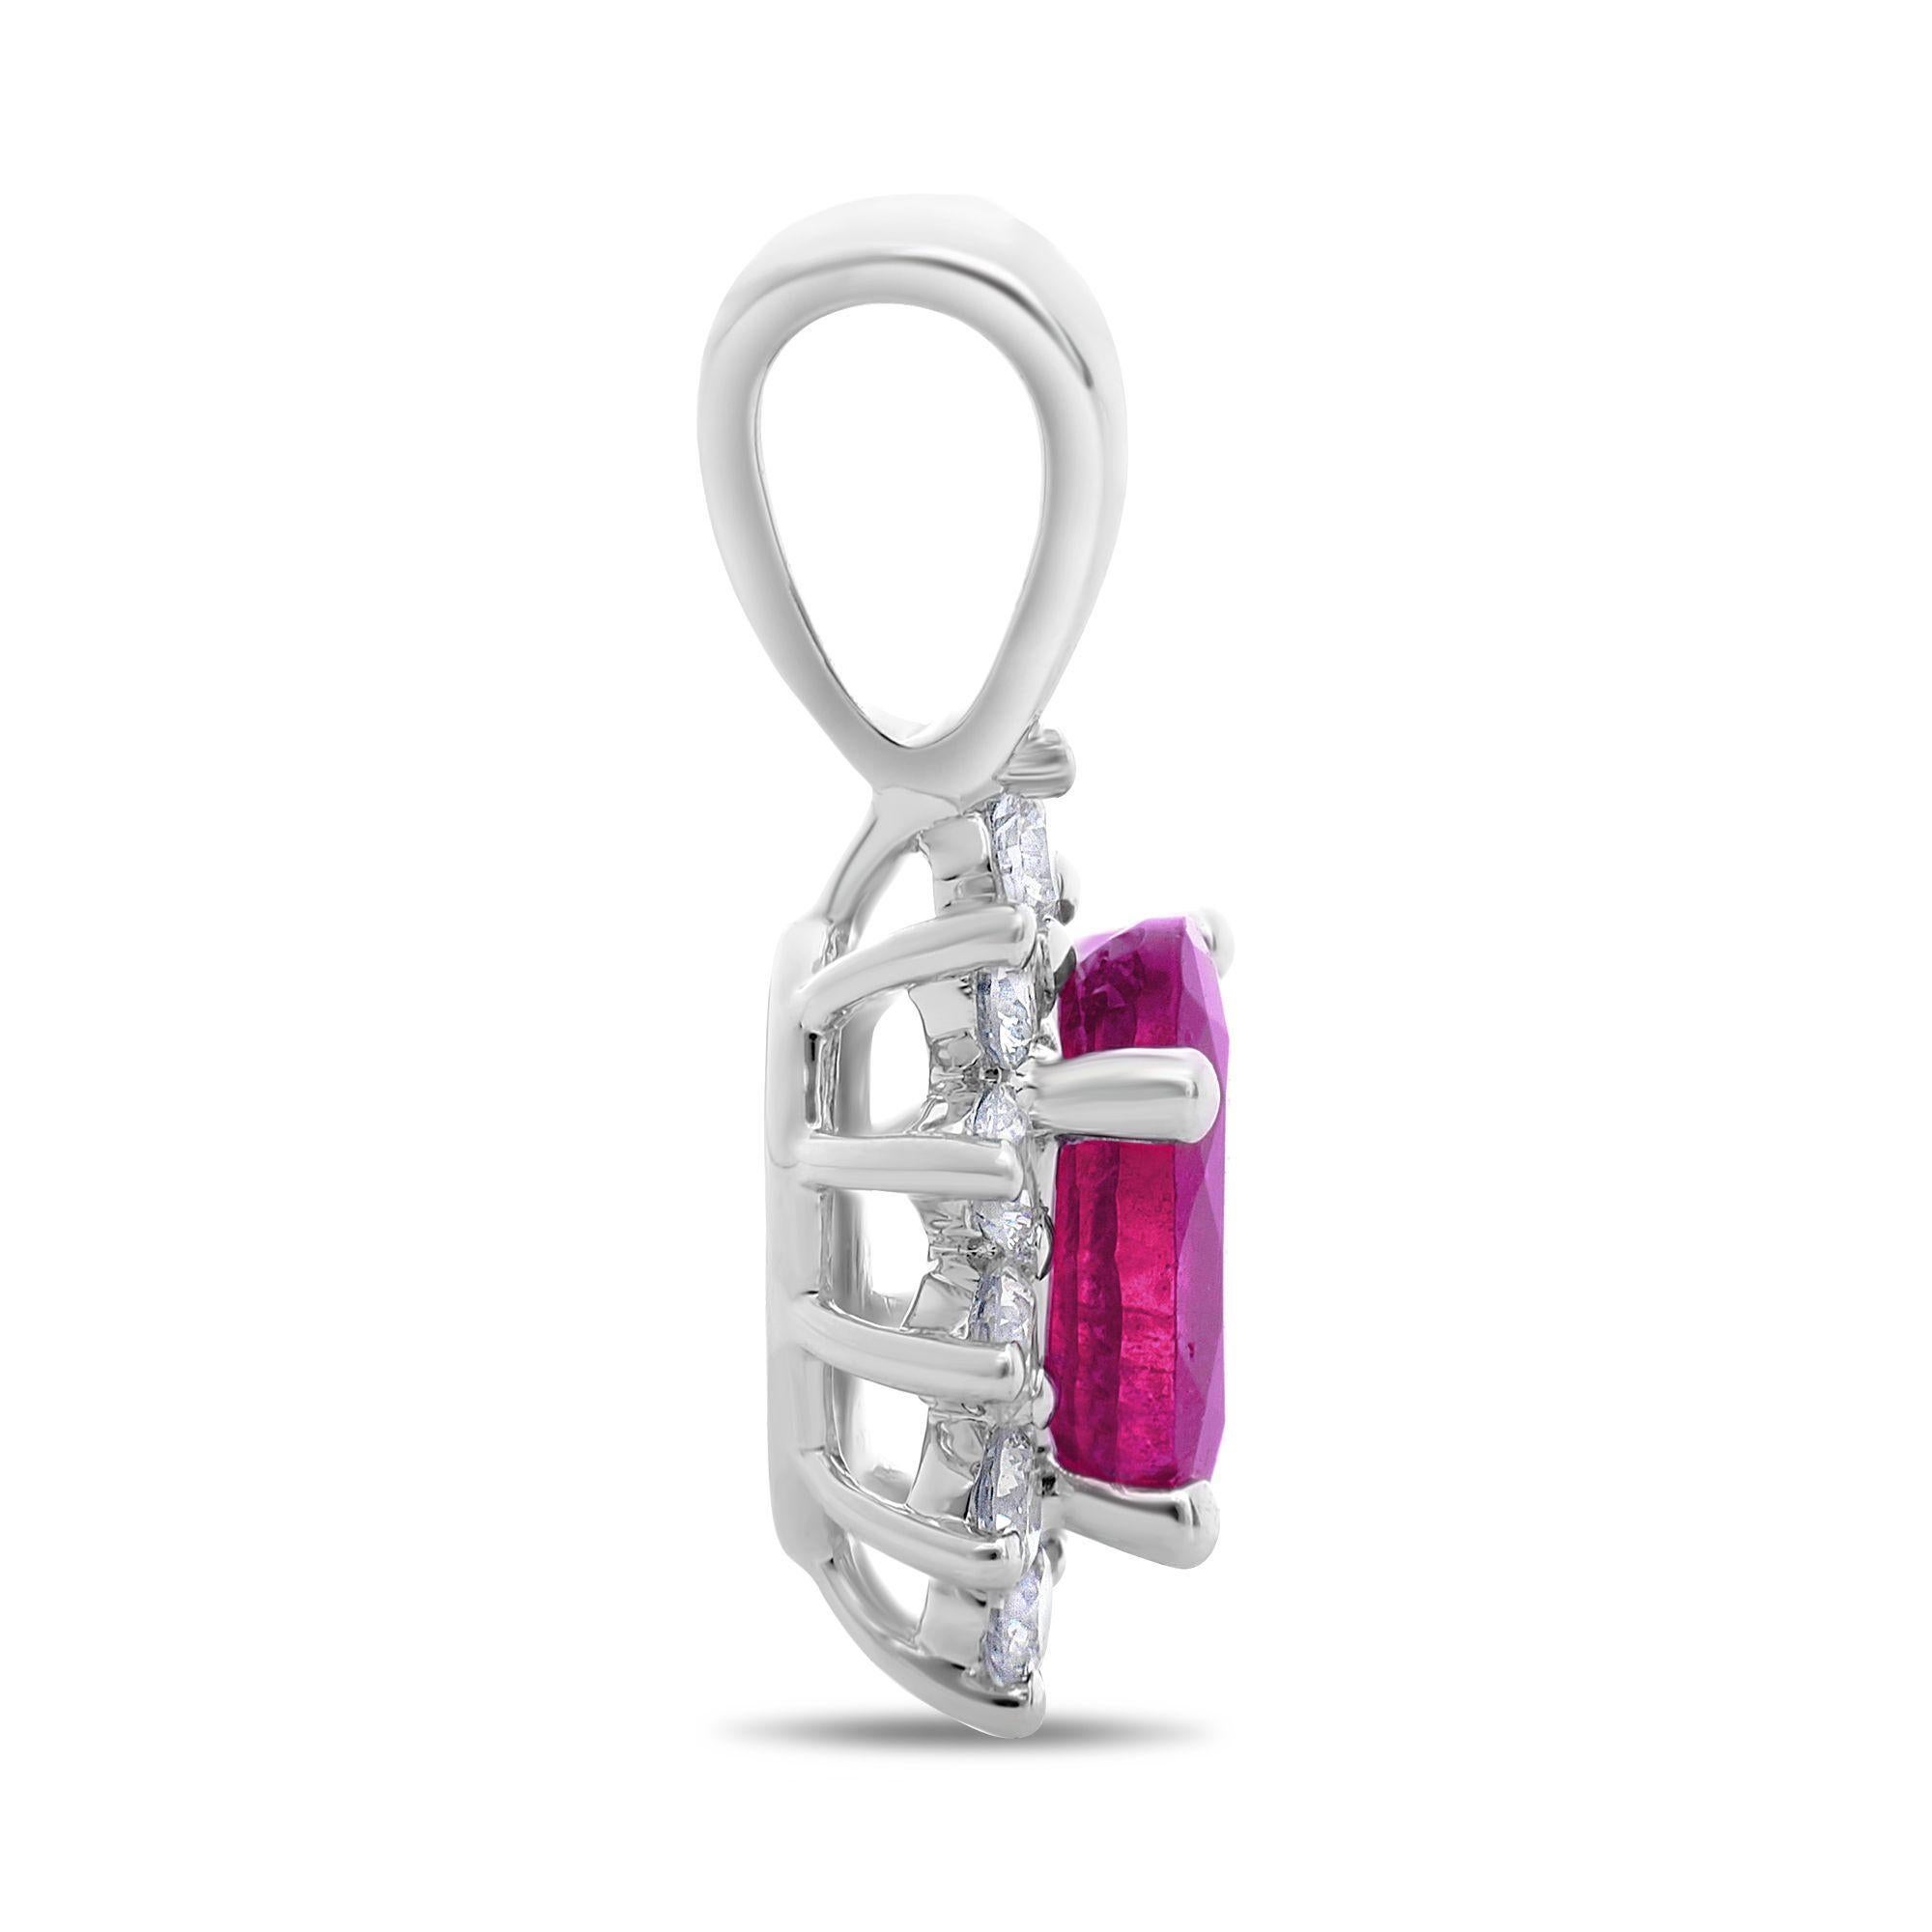 This 18 karat white gold pendant showcases a 0.63 carat, oval cut pink sapphire at the center. The colorful center stone is accentuated by 0.18 carats of round cut white diamonds, showcased in a stunning single halo. 

The center stone is eye clean